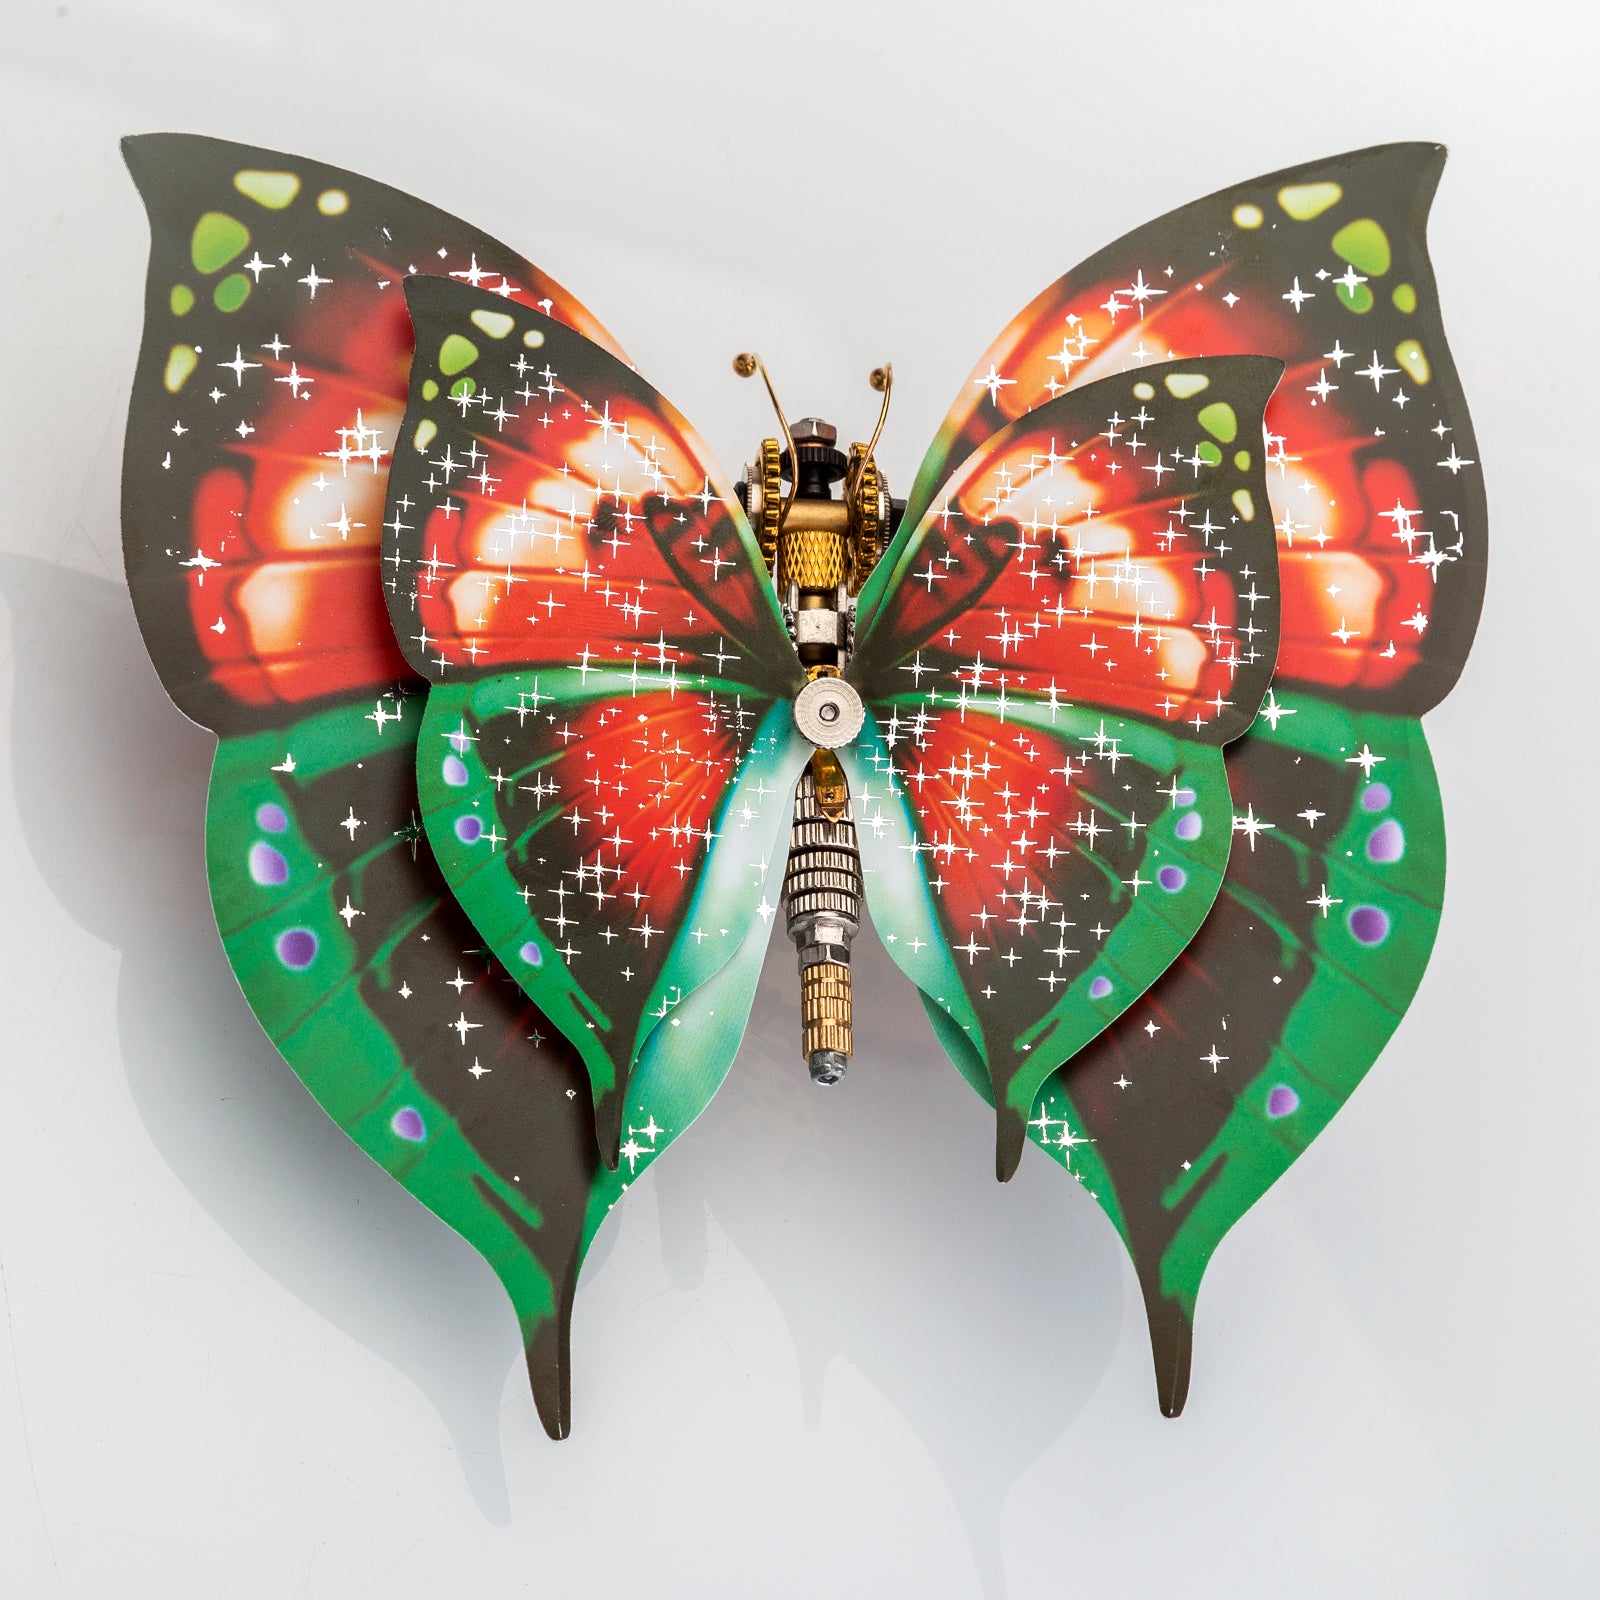 150Pcs Red and Green Swallowtail Butterfly Assembly Steampunk Model Kit